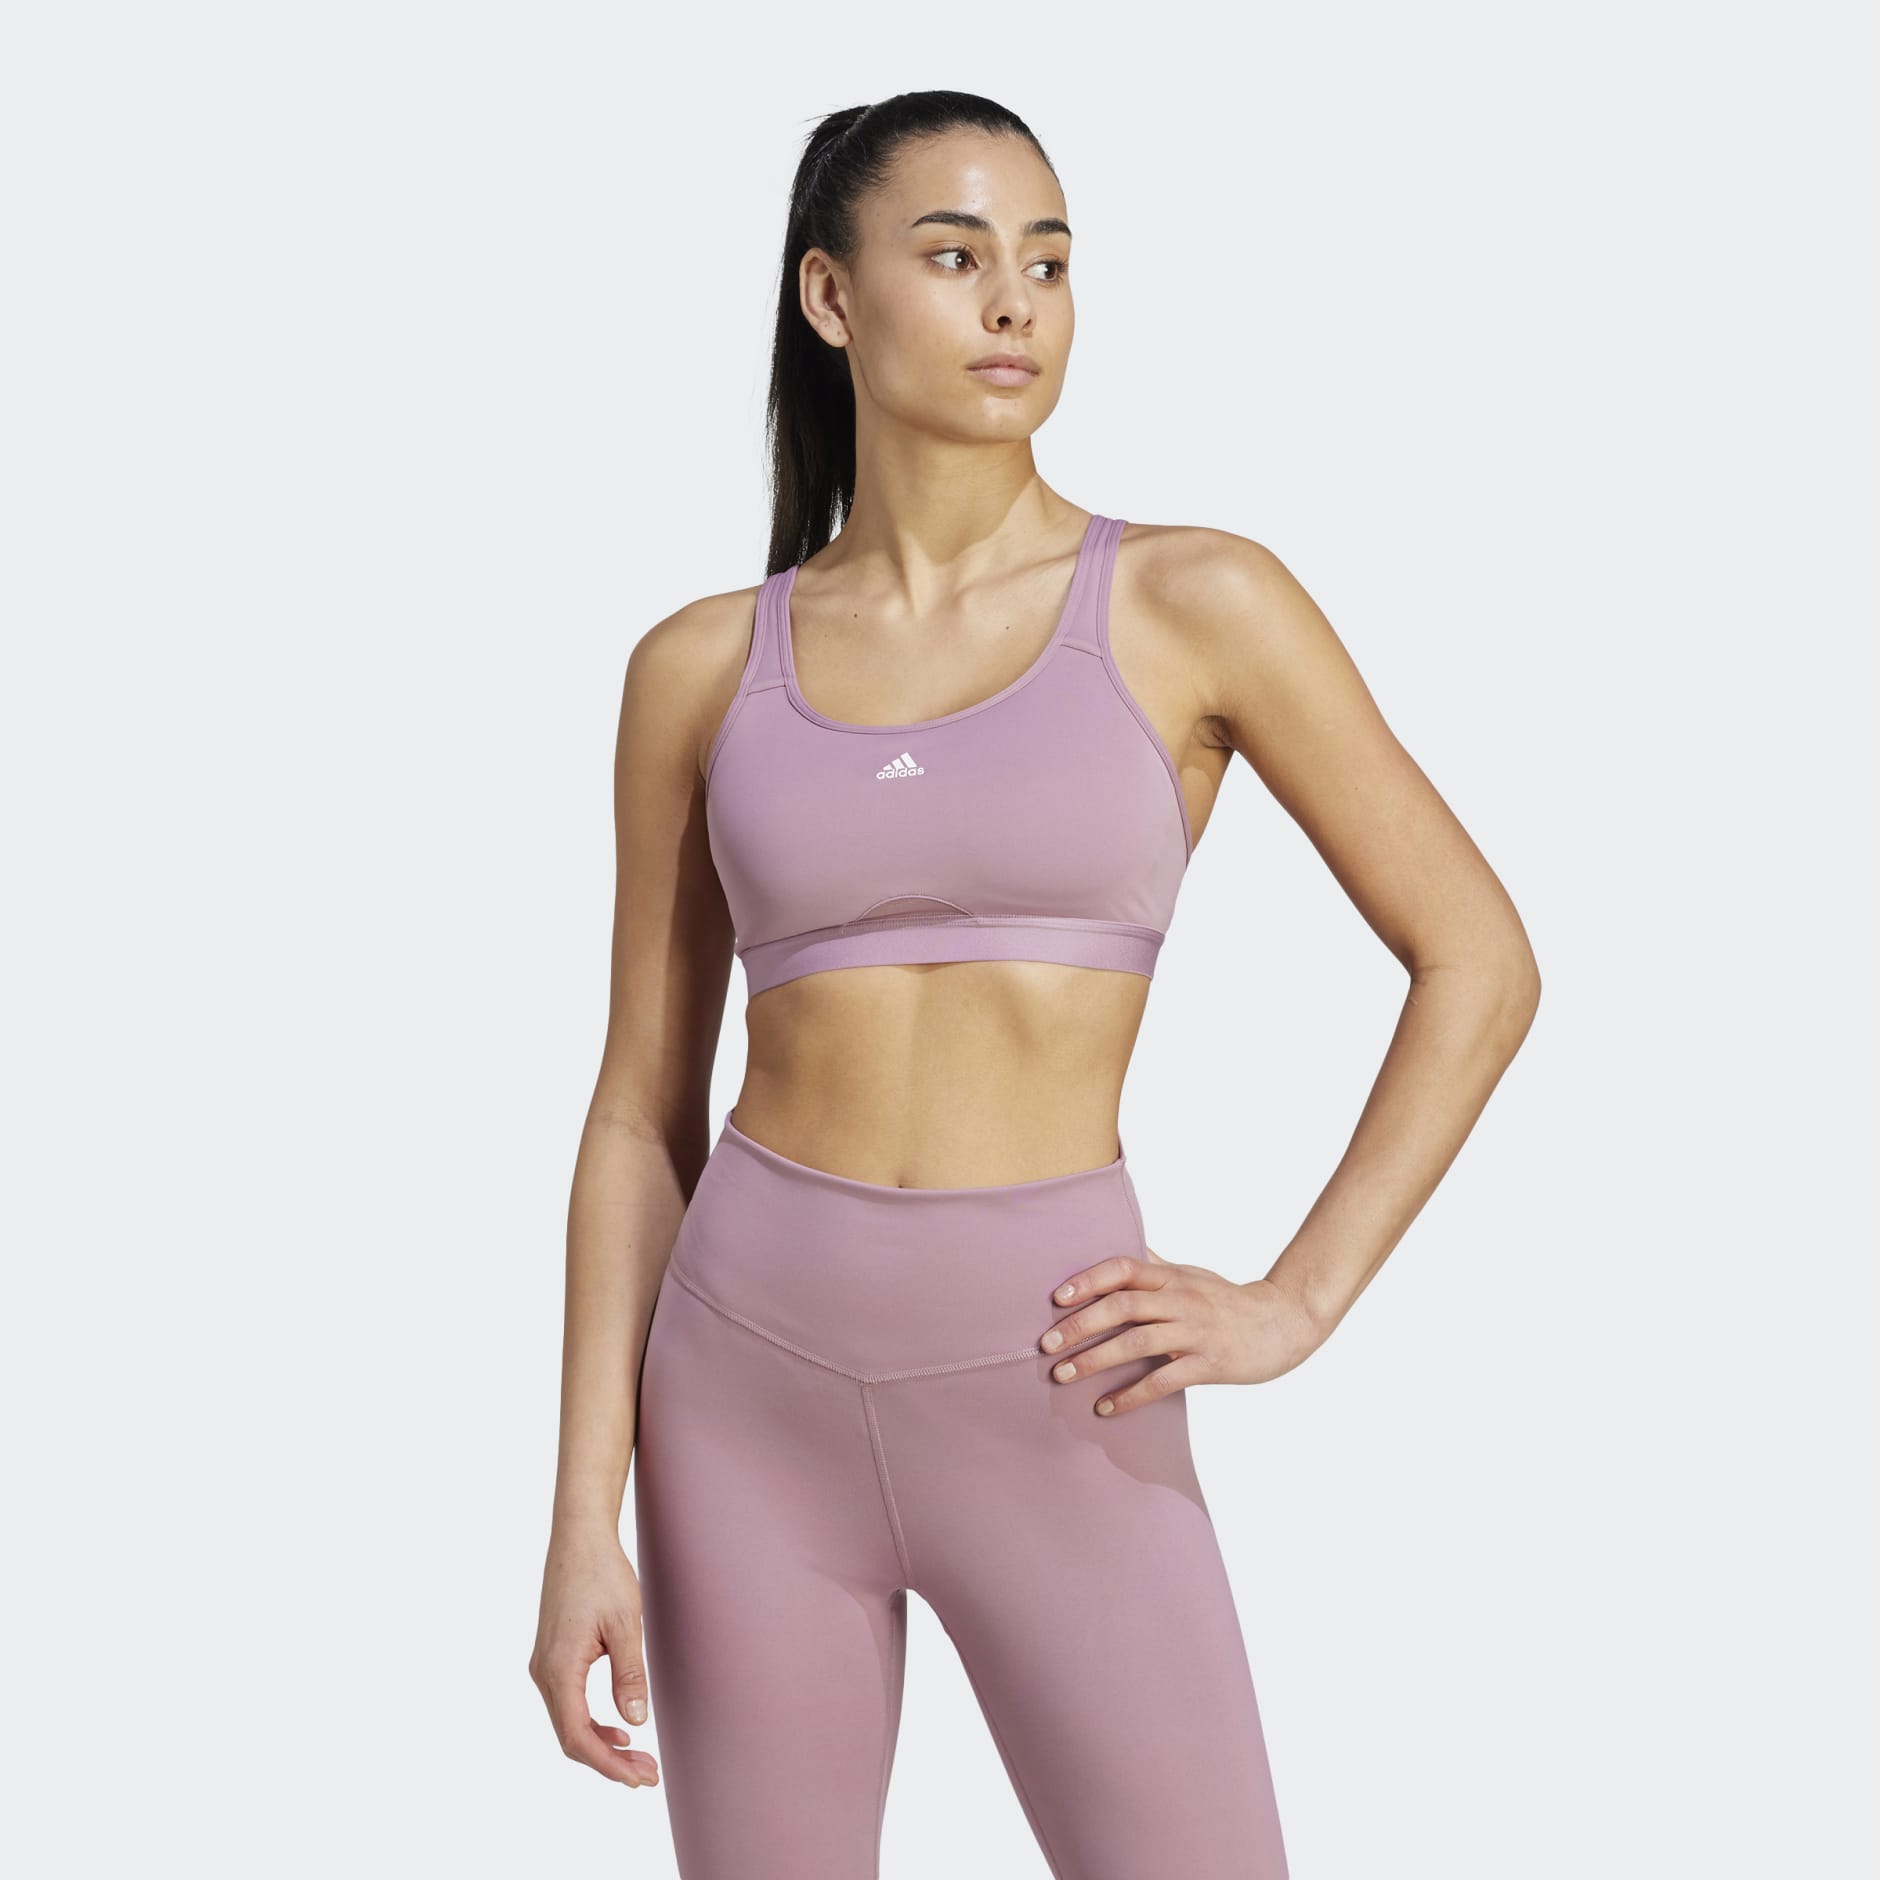 Women's Clothing - adidas TLRD Move Training High-Support Bra